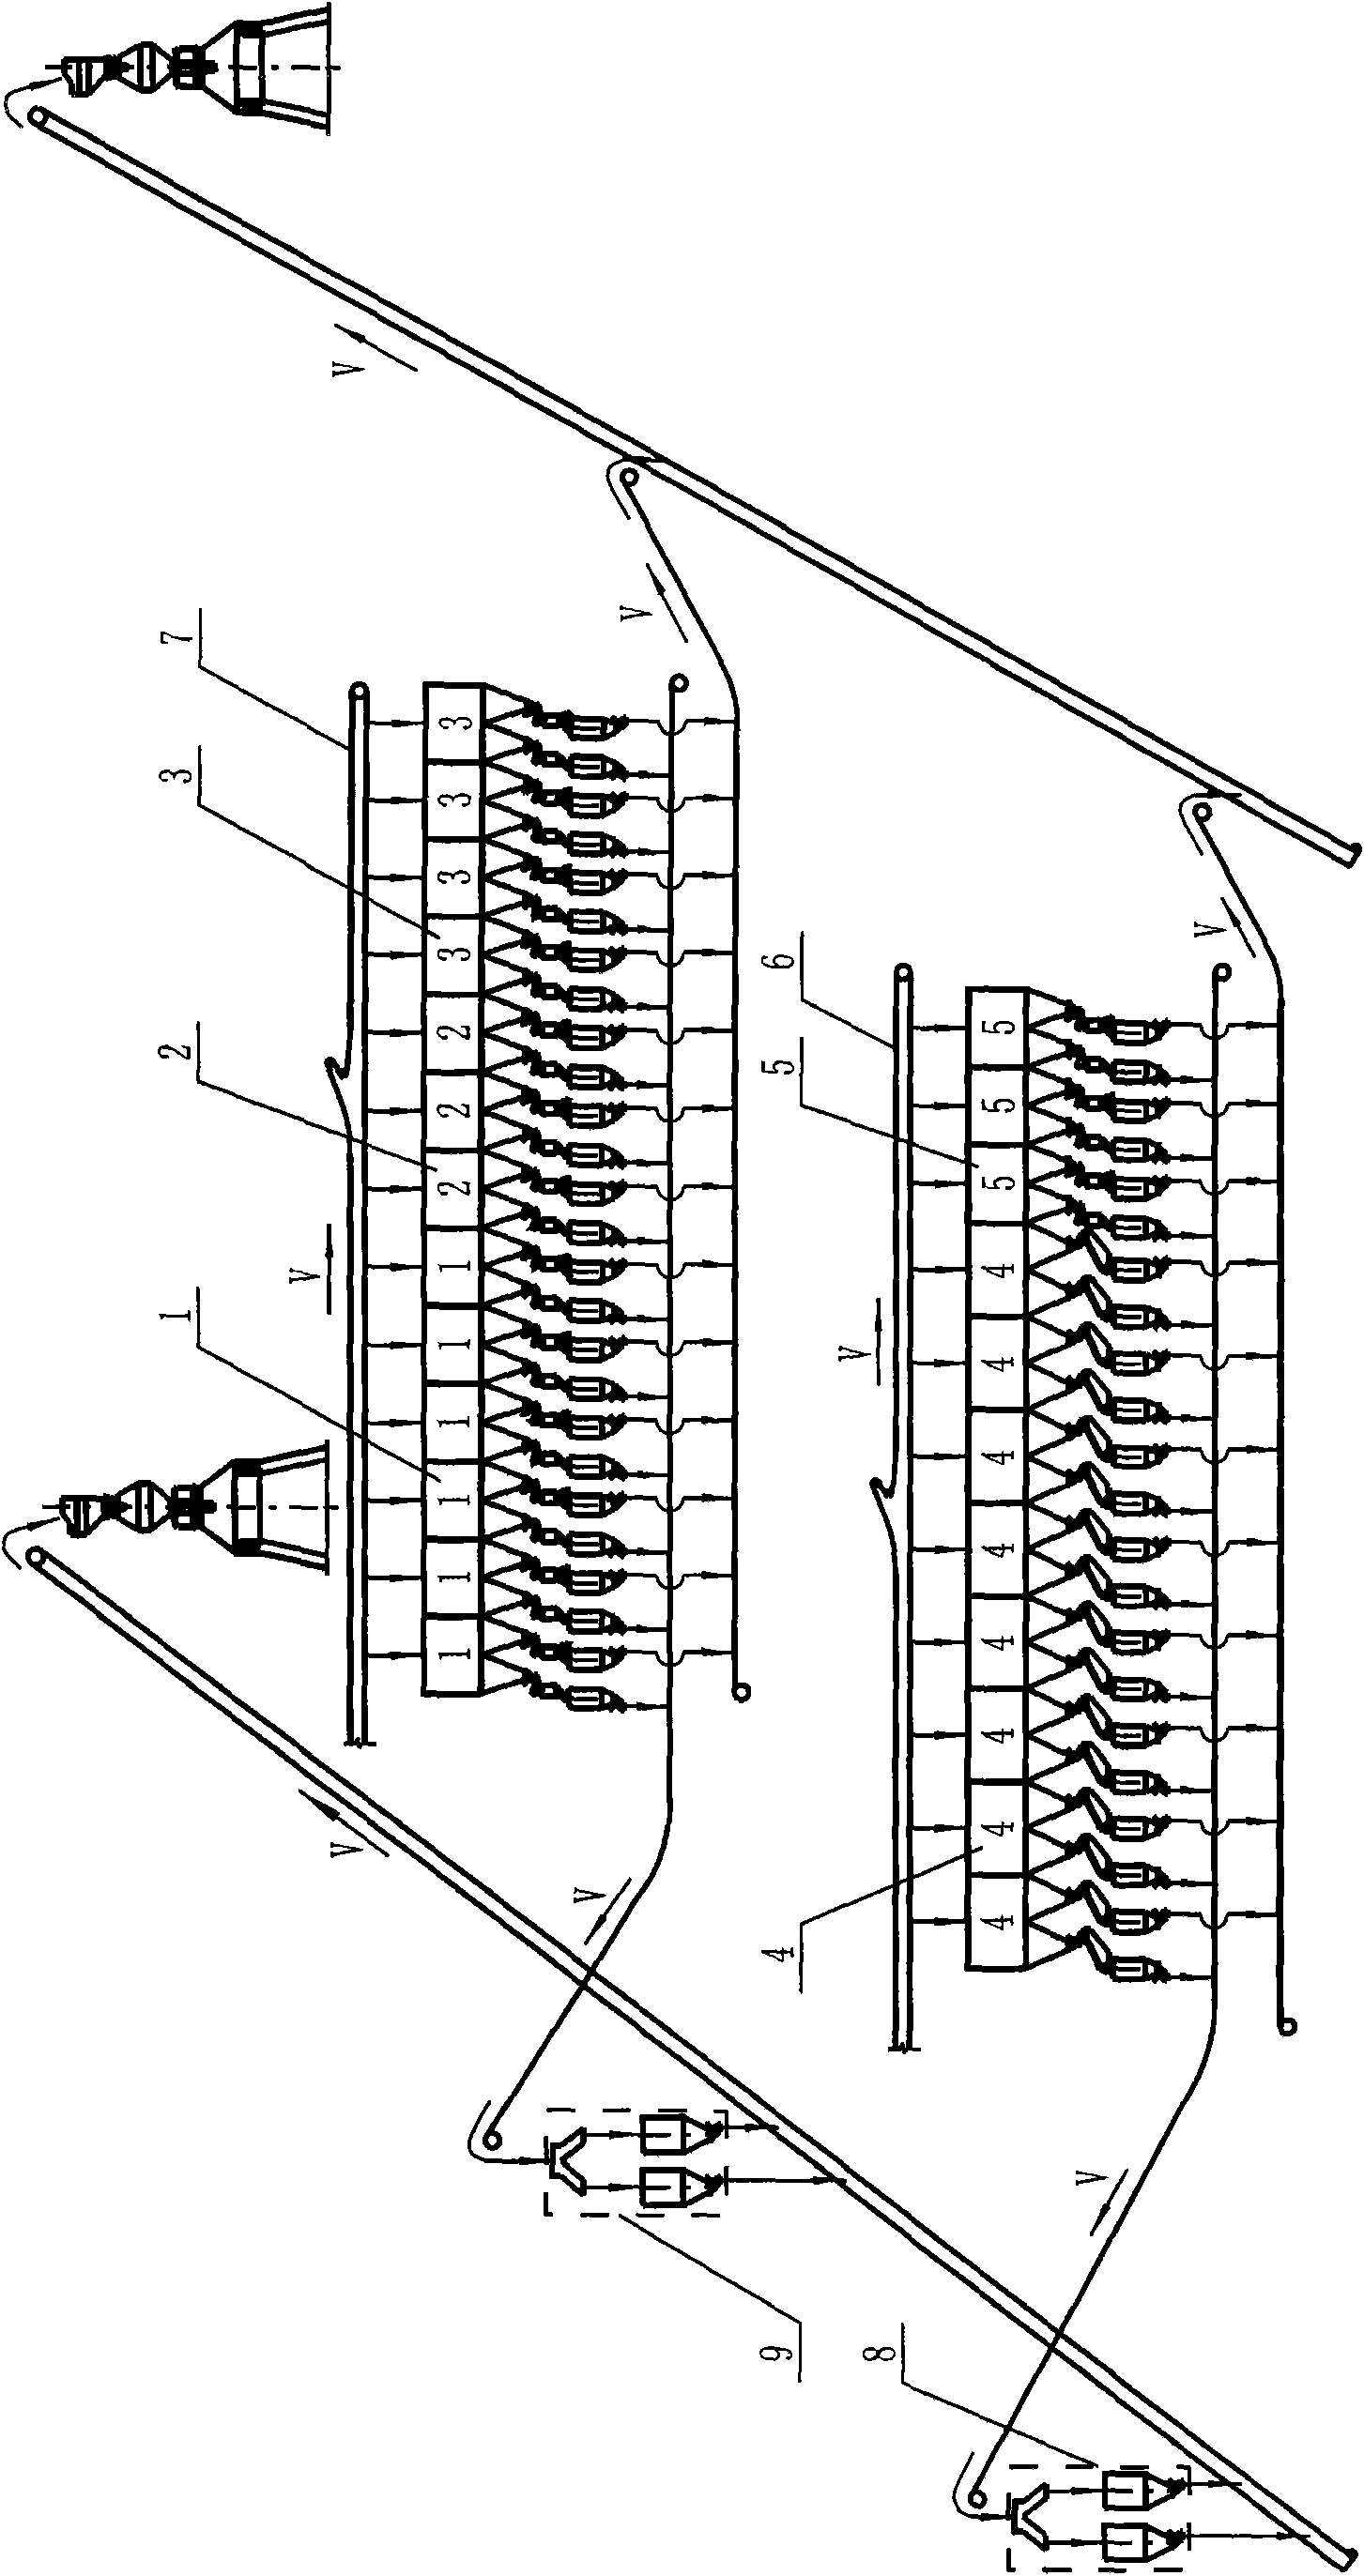 Feeding system for blast furnace ore and coke channel system